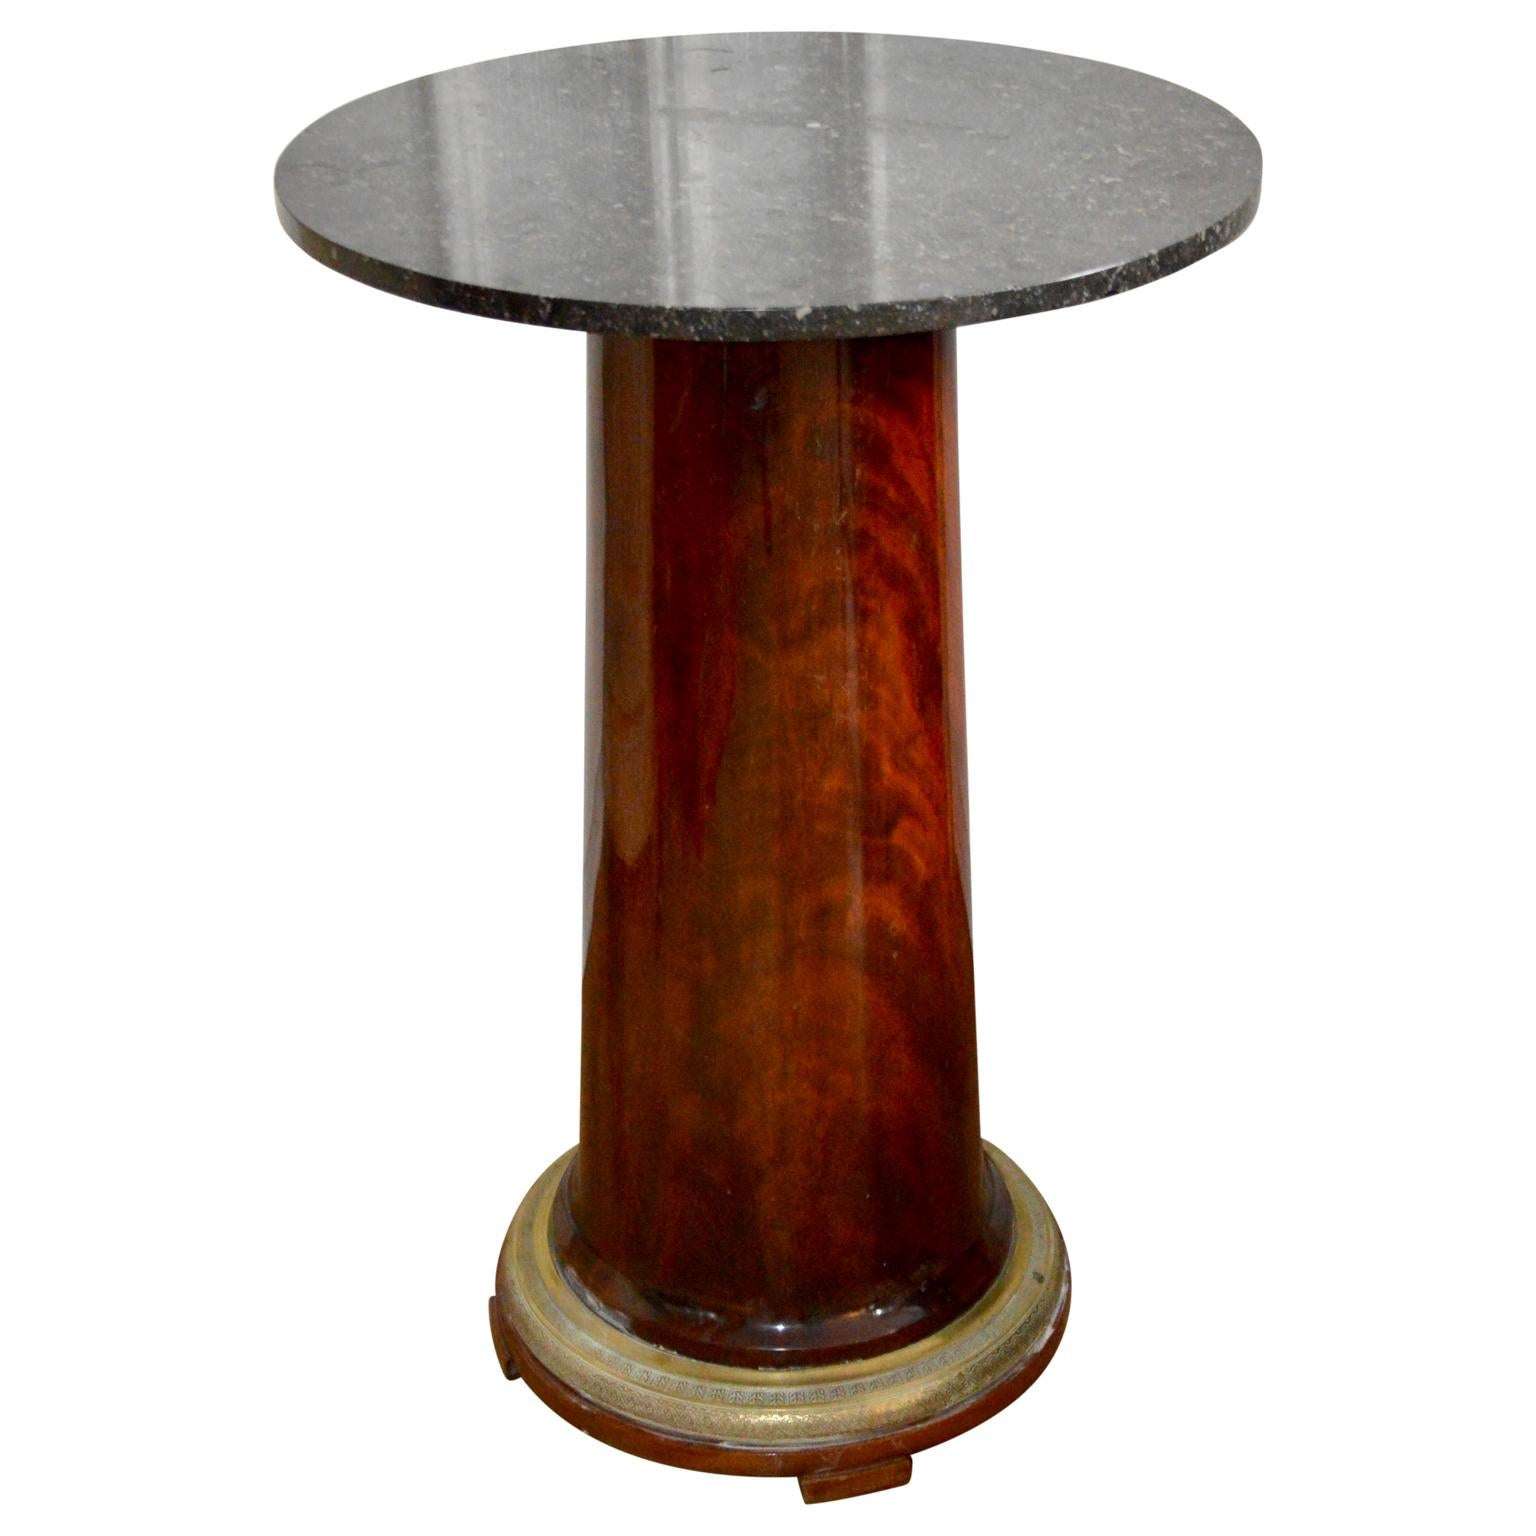 Empire period marble topped gueridon with a flamed mahogany base, finished with a lustrous French polish. The foot have a finely cast brass ring for decoration.